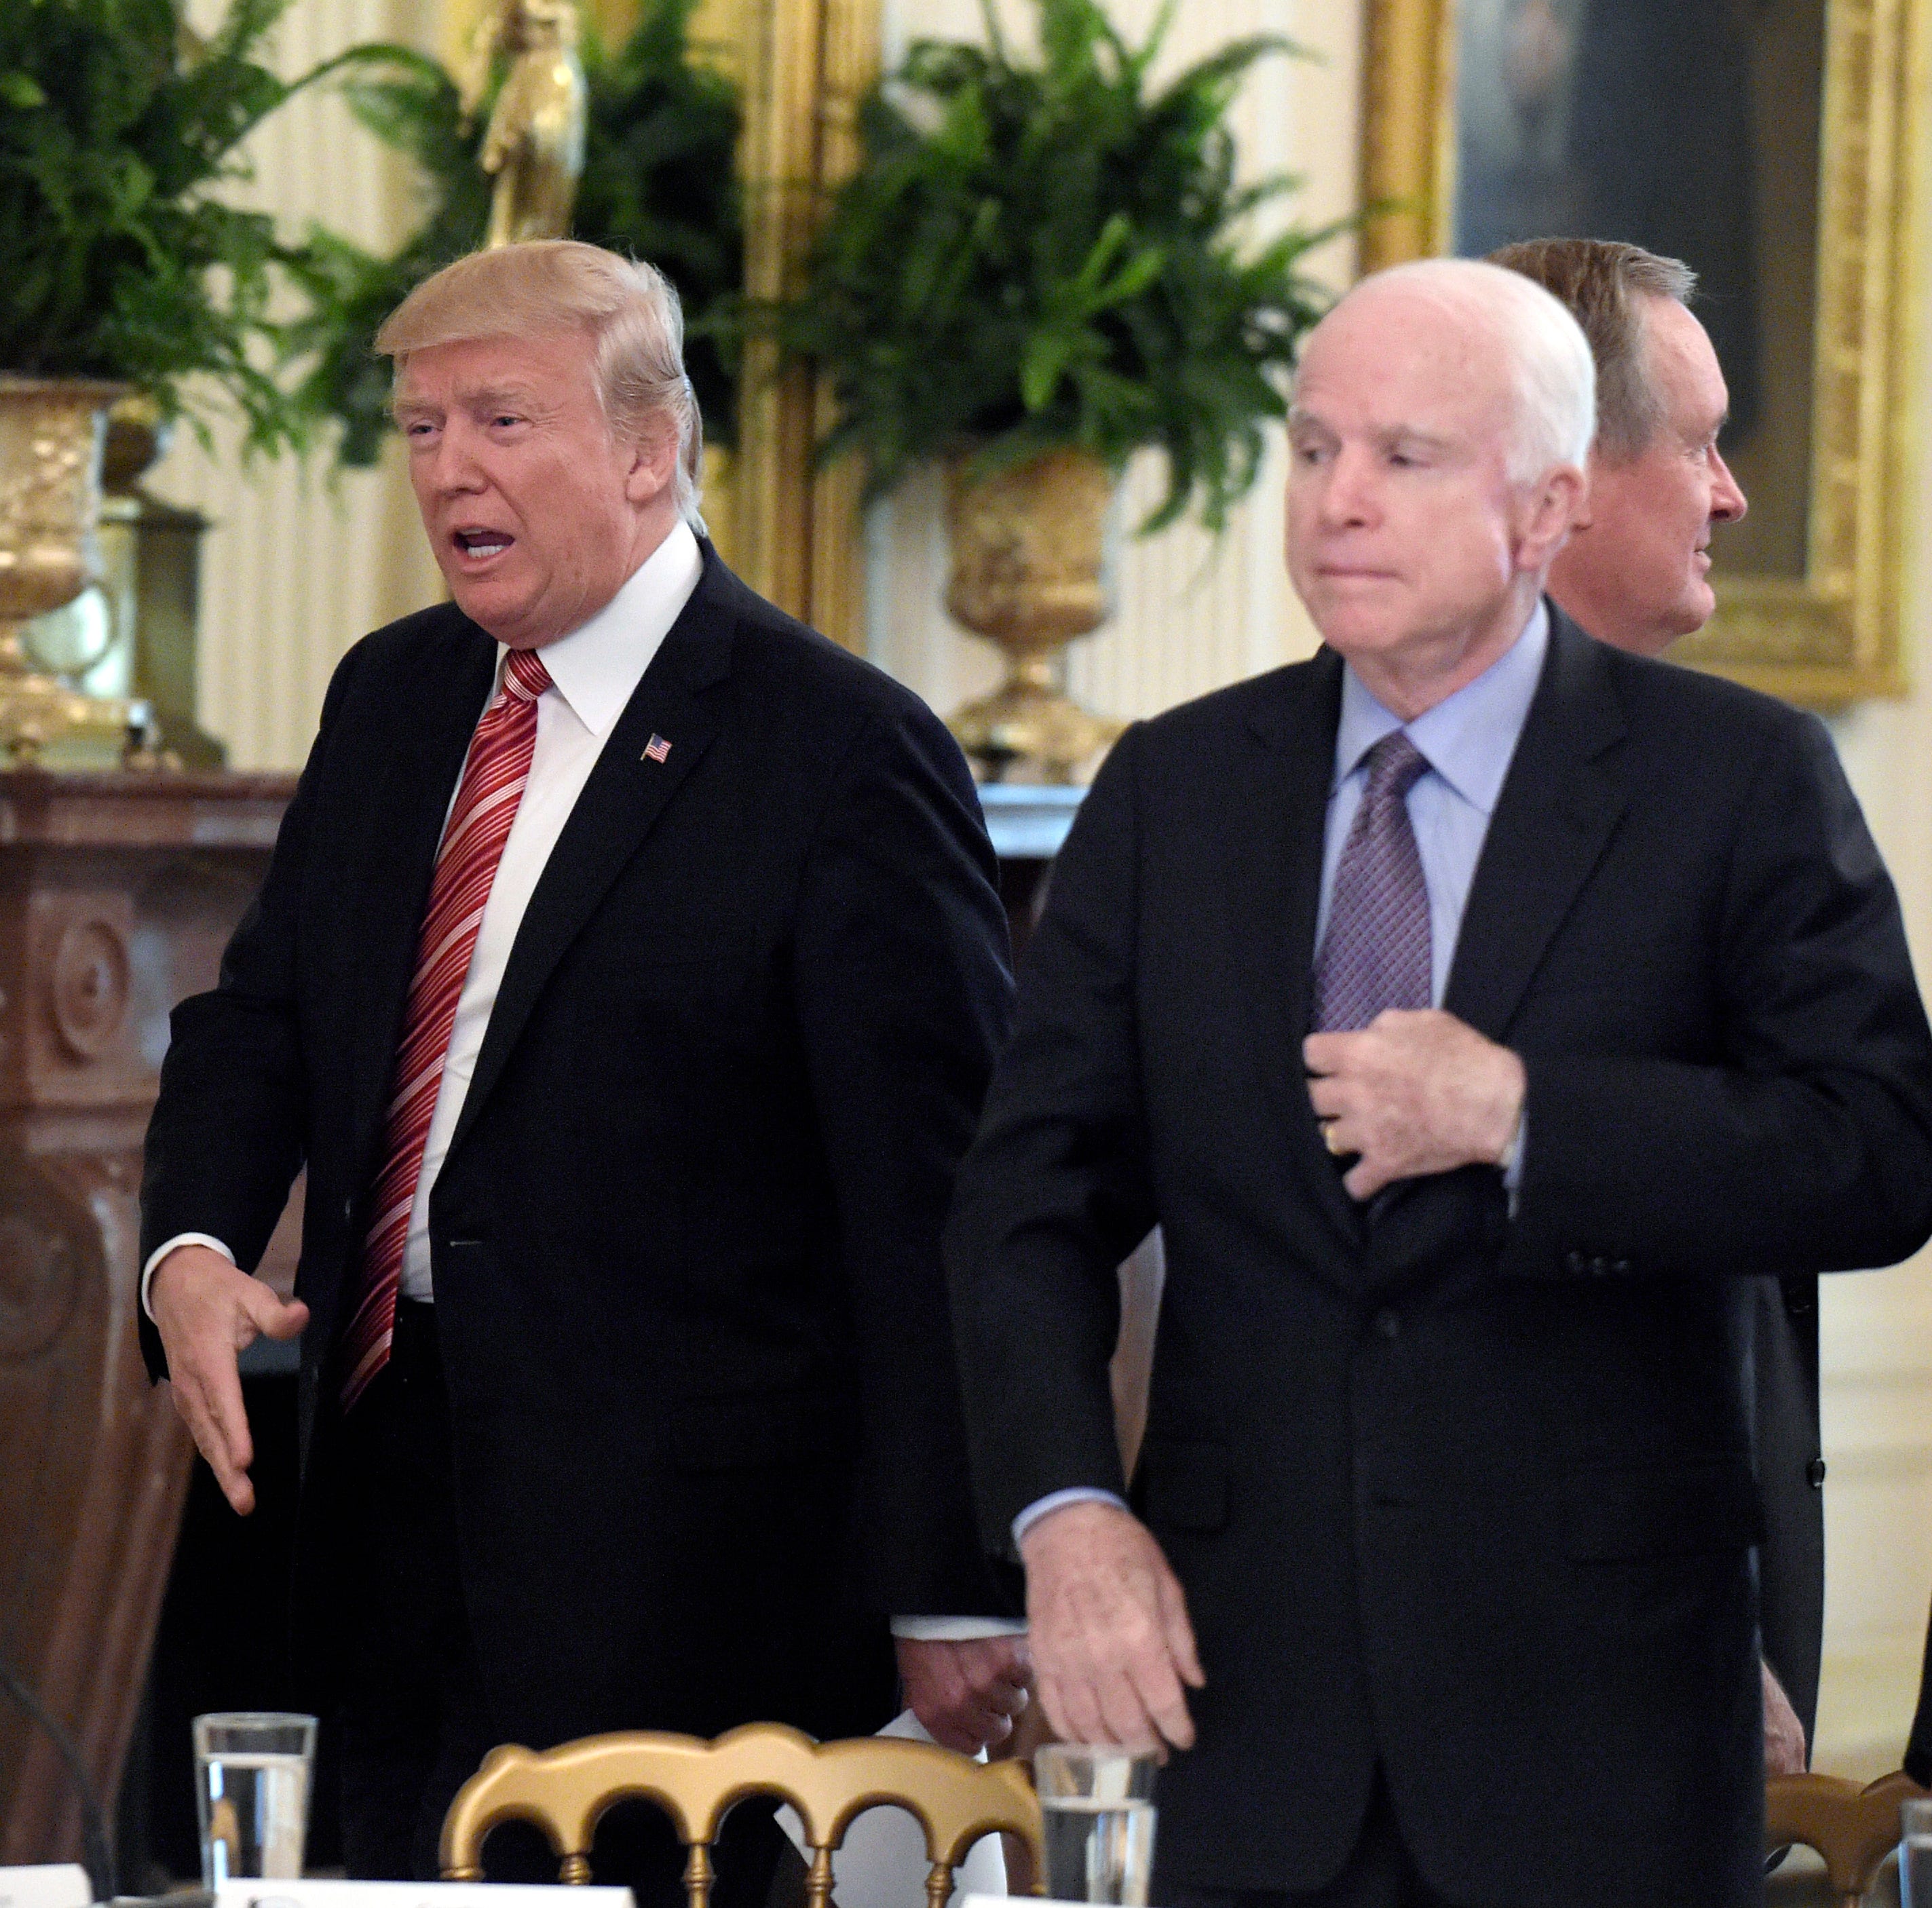 President Donald Trump reached out to shake hands with Sen. Todd Young, R-Ind., as he arrived for a meeting with Republican senators on health care in the East Room of the White House on June 27, 2017. Sen. John McCain, R-Ariz., who later cast the de